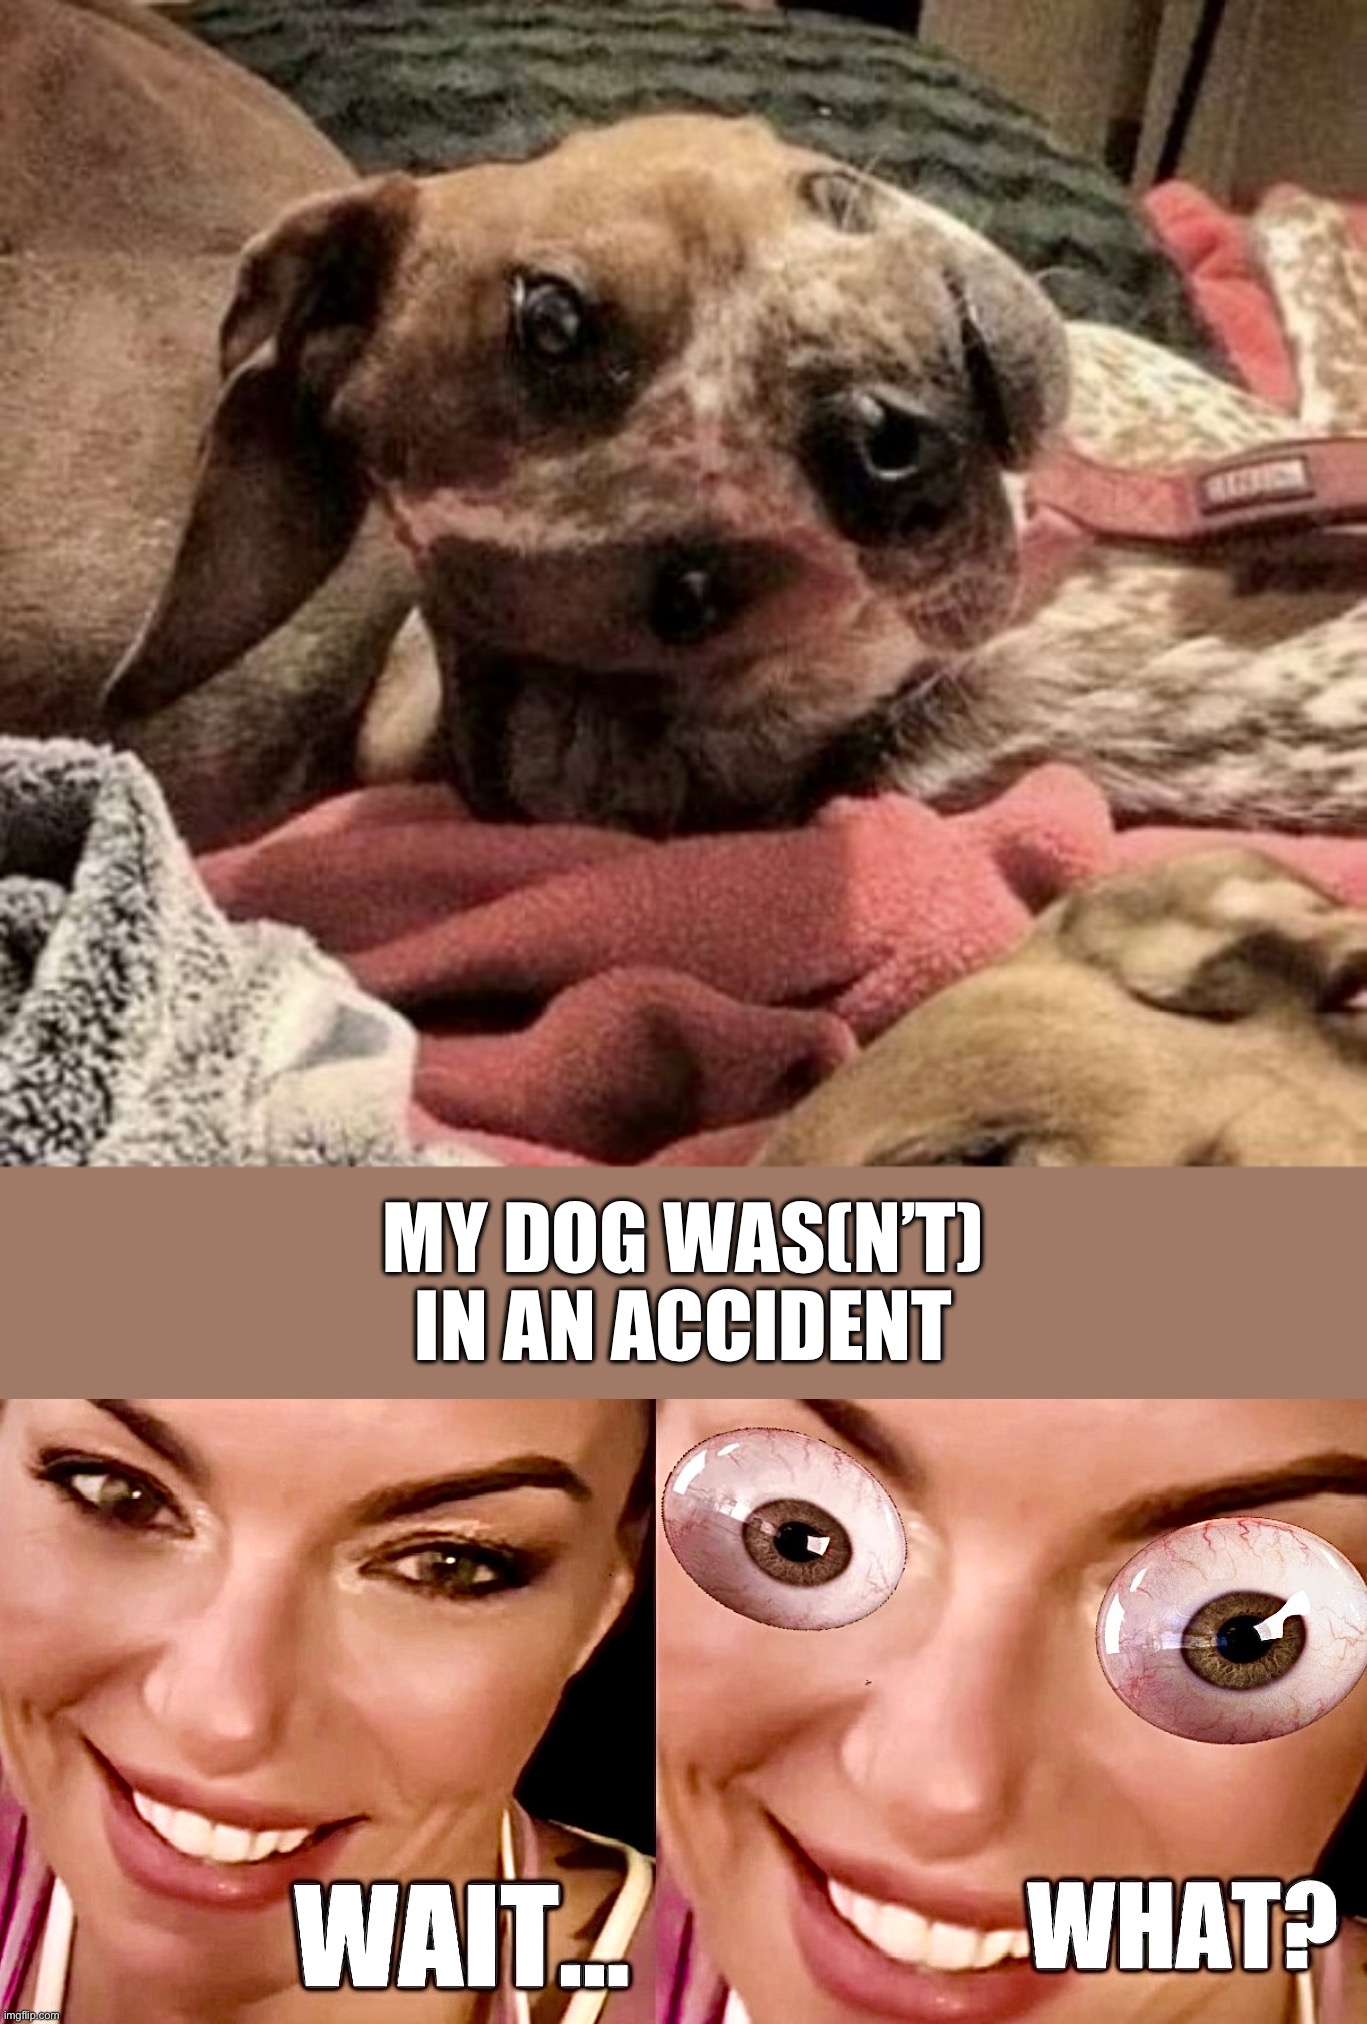 Fido is fine | MY DOG WAS(N’T)
IN AN ACCIDENT | image tagged in wait what,double take,memes,dog,look into my eyes | made w/ Imgflip meme maker